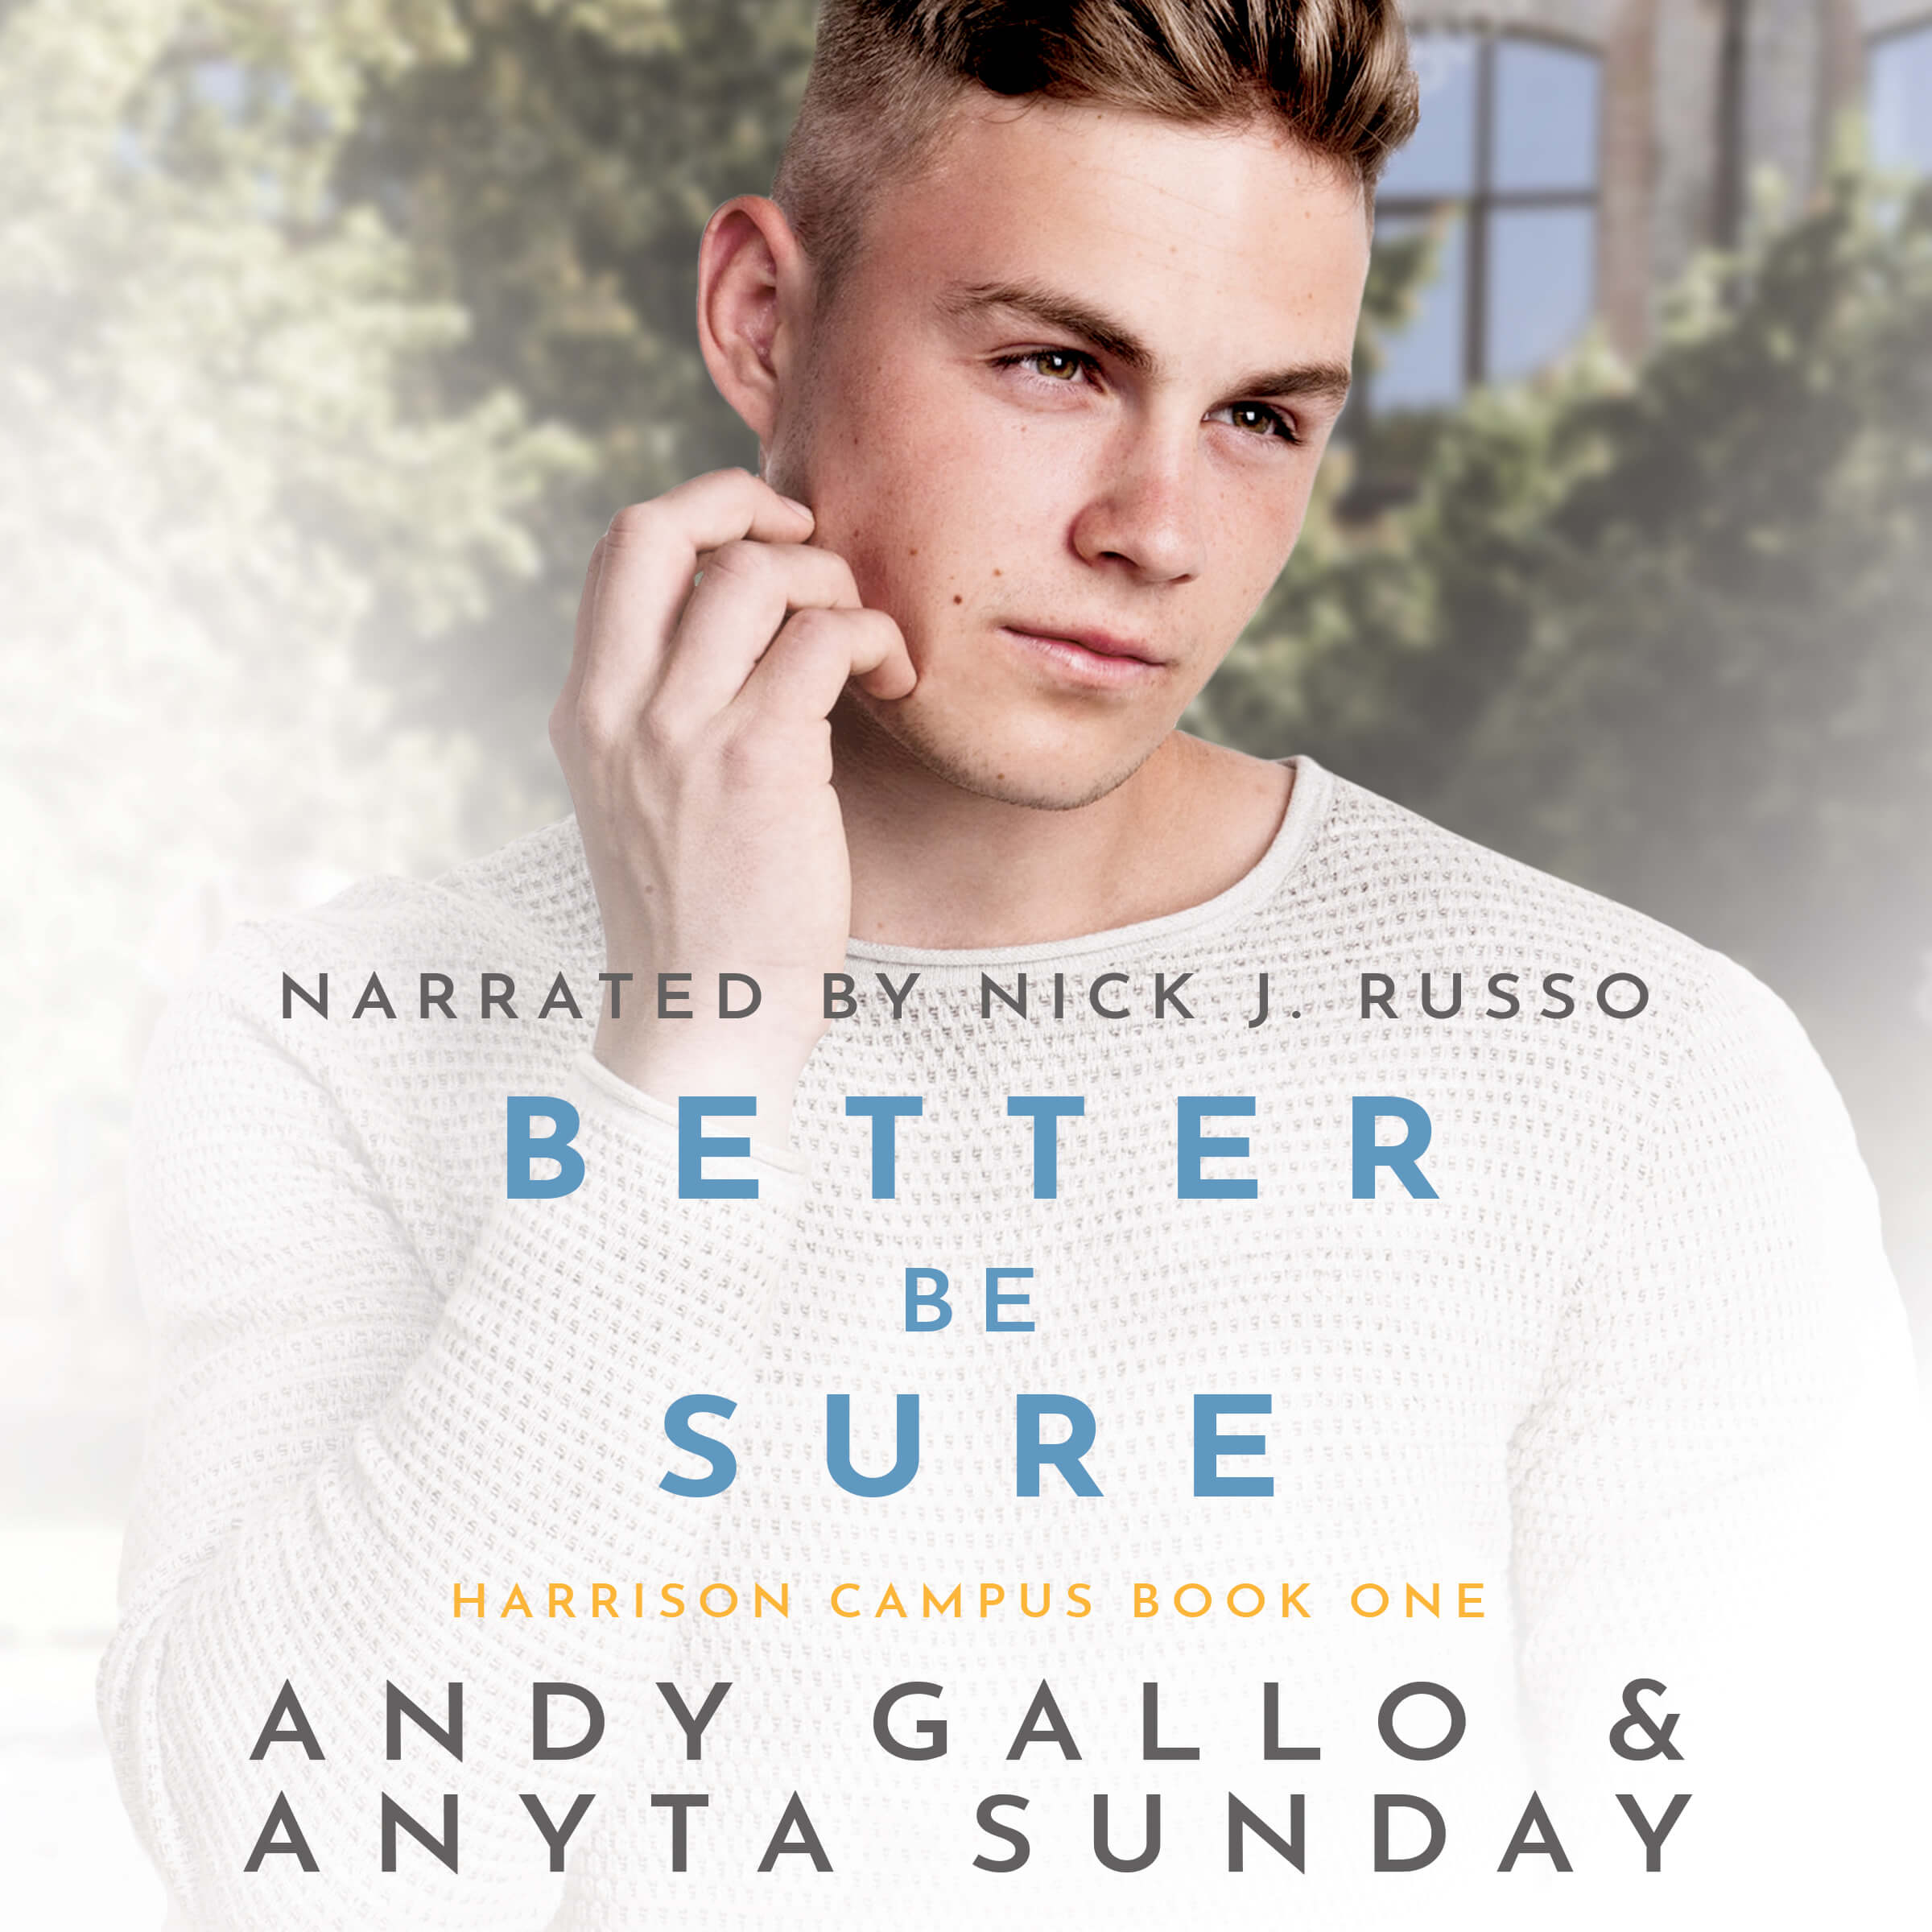 Audiobook of Gay Romance Novel Better be Sure by Anyta Sunday and Andy Gallo